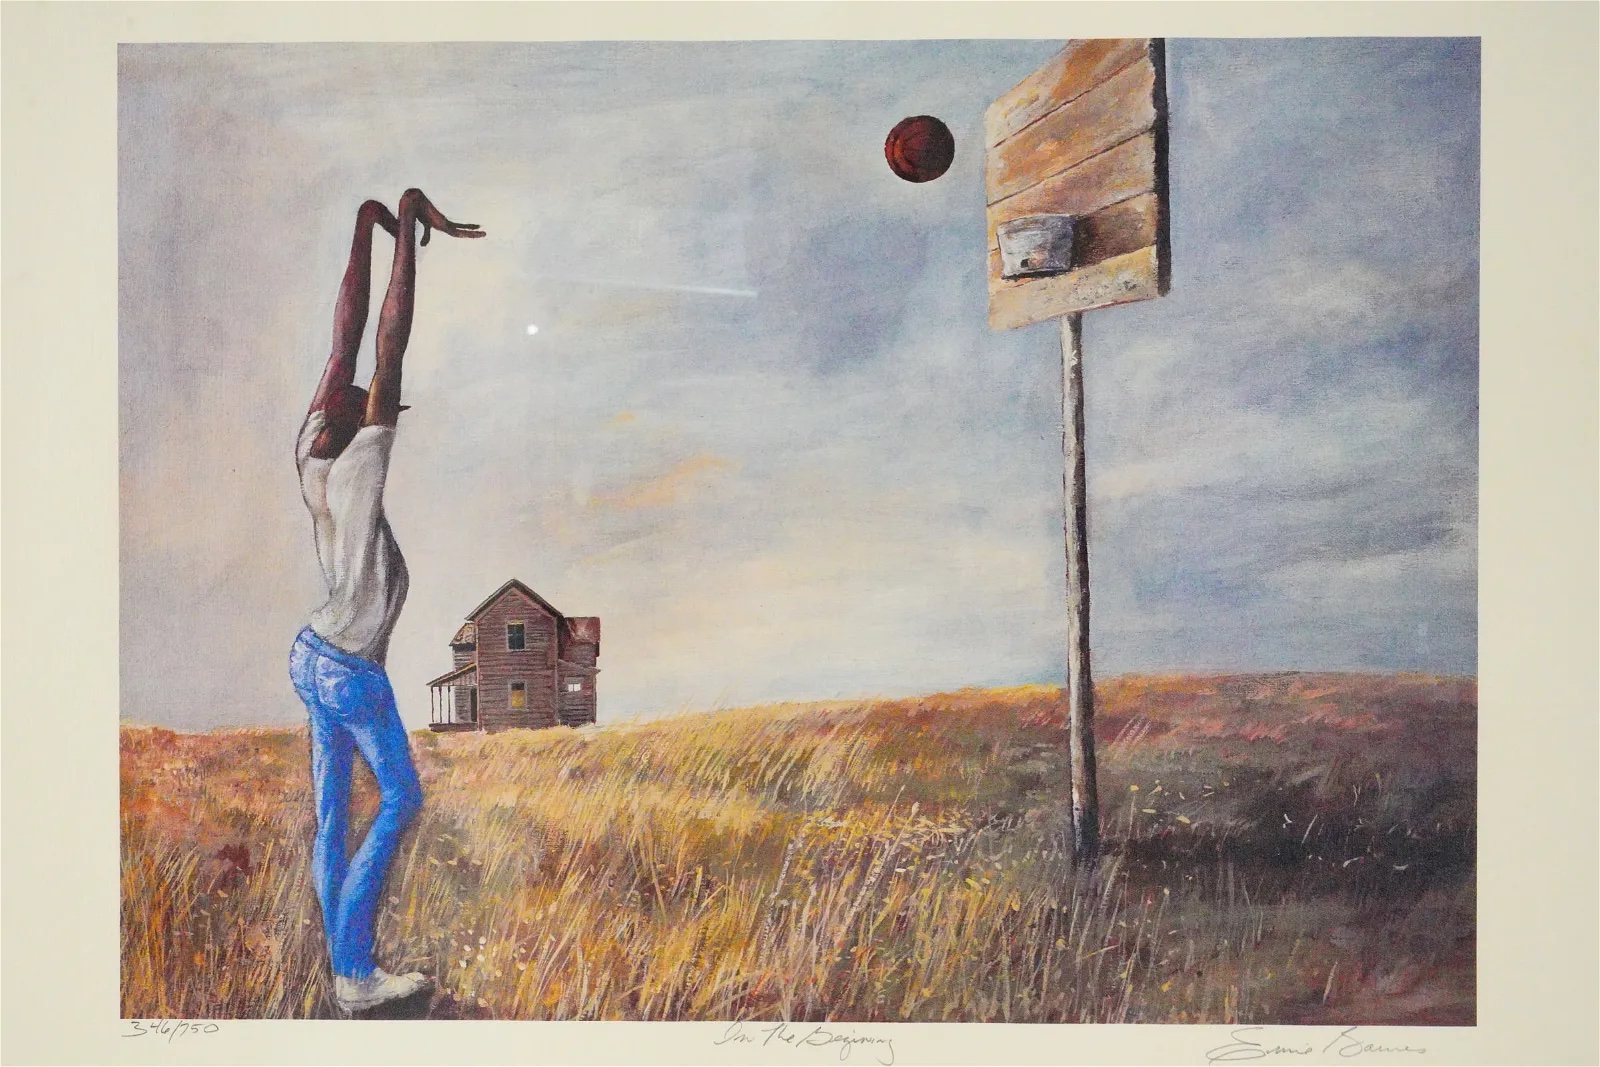 Ernie Barnes, 'In The Beginning' signed print, estimated at $6,500-$7,000 at GWS.